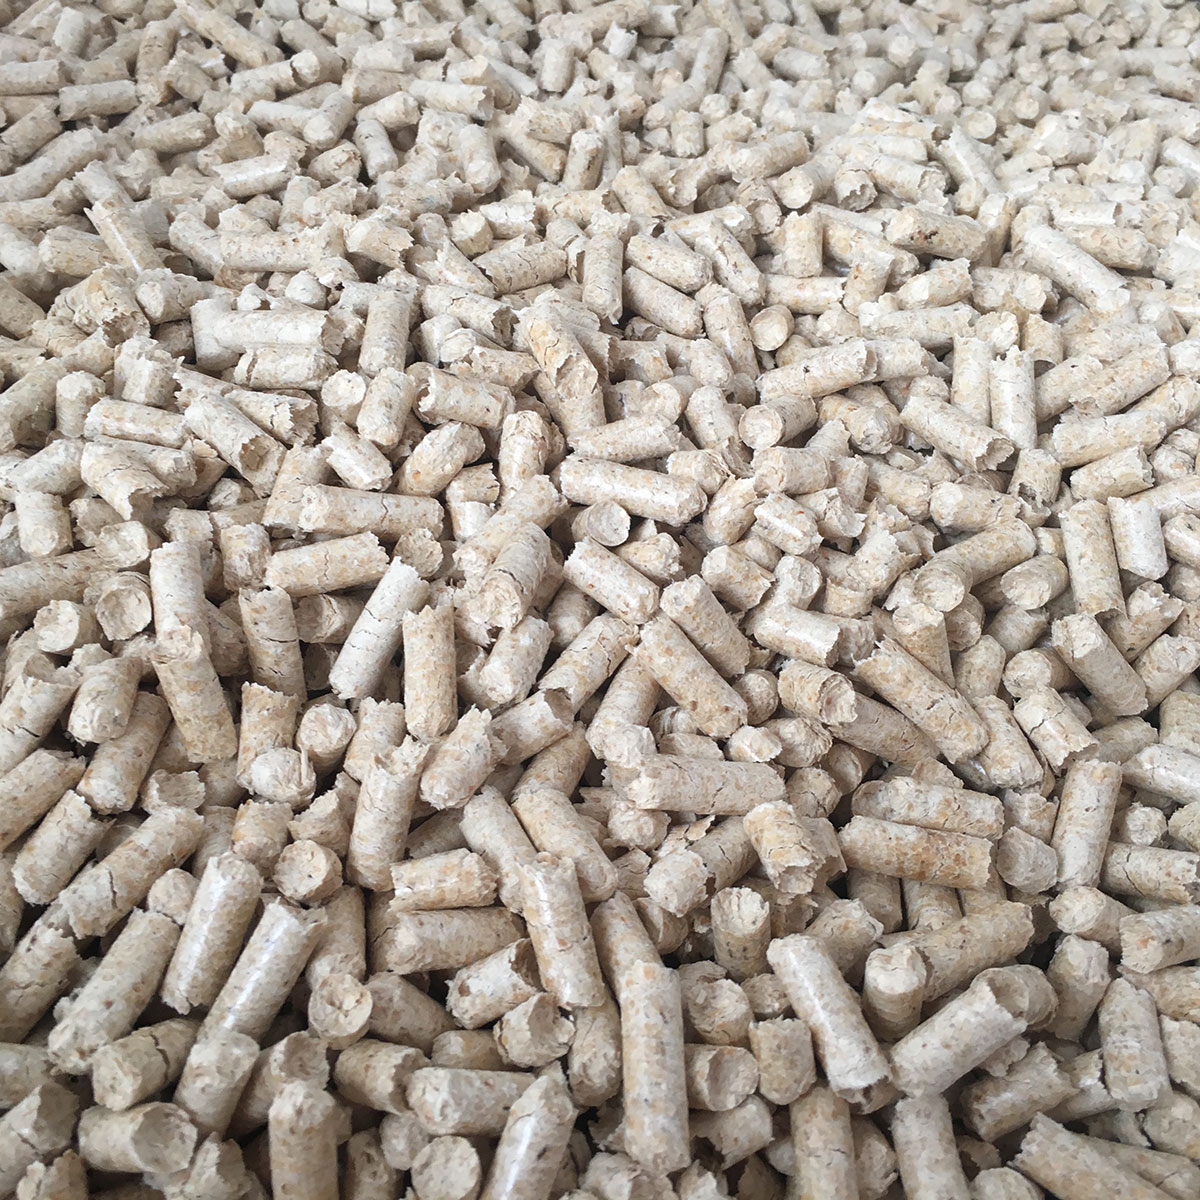 Close up picture of pellets